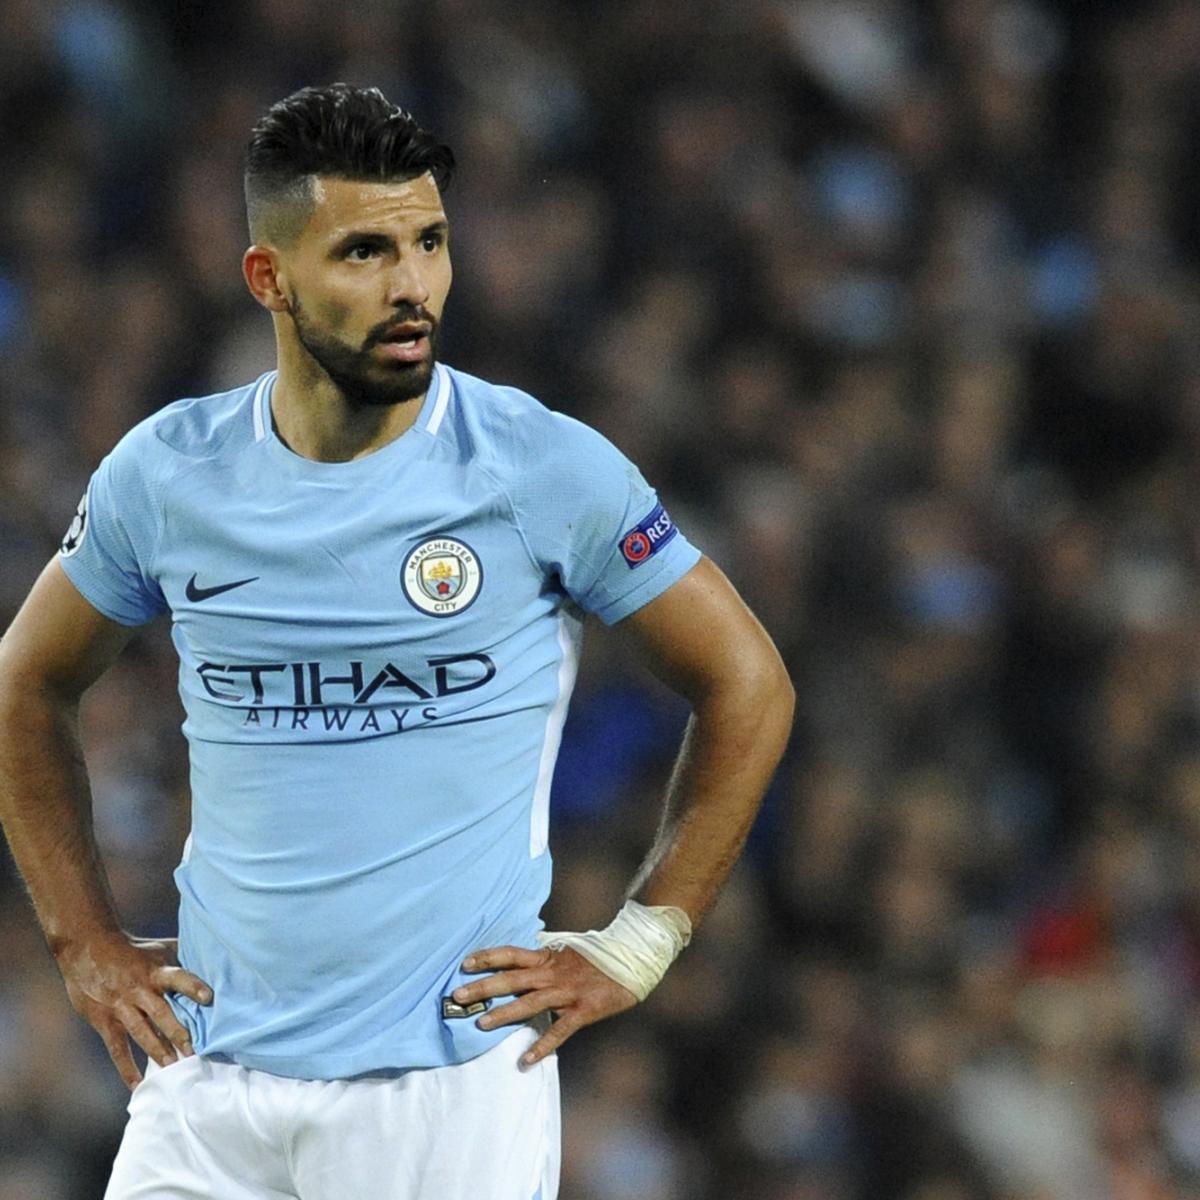 Sergio Aguero Says He Could Have Died In Car Crash Without Seatbelt